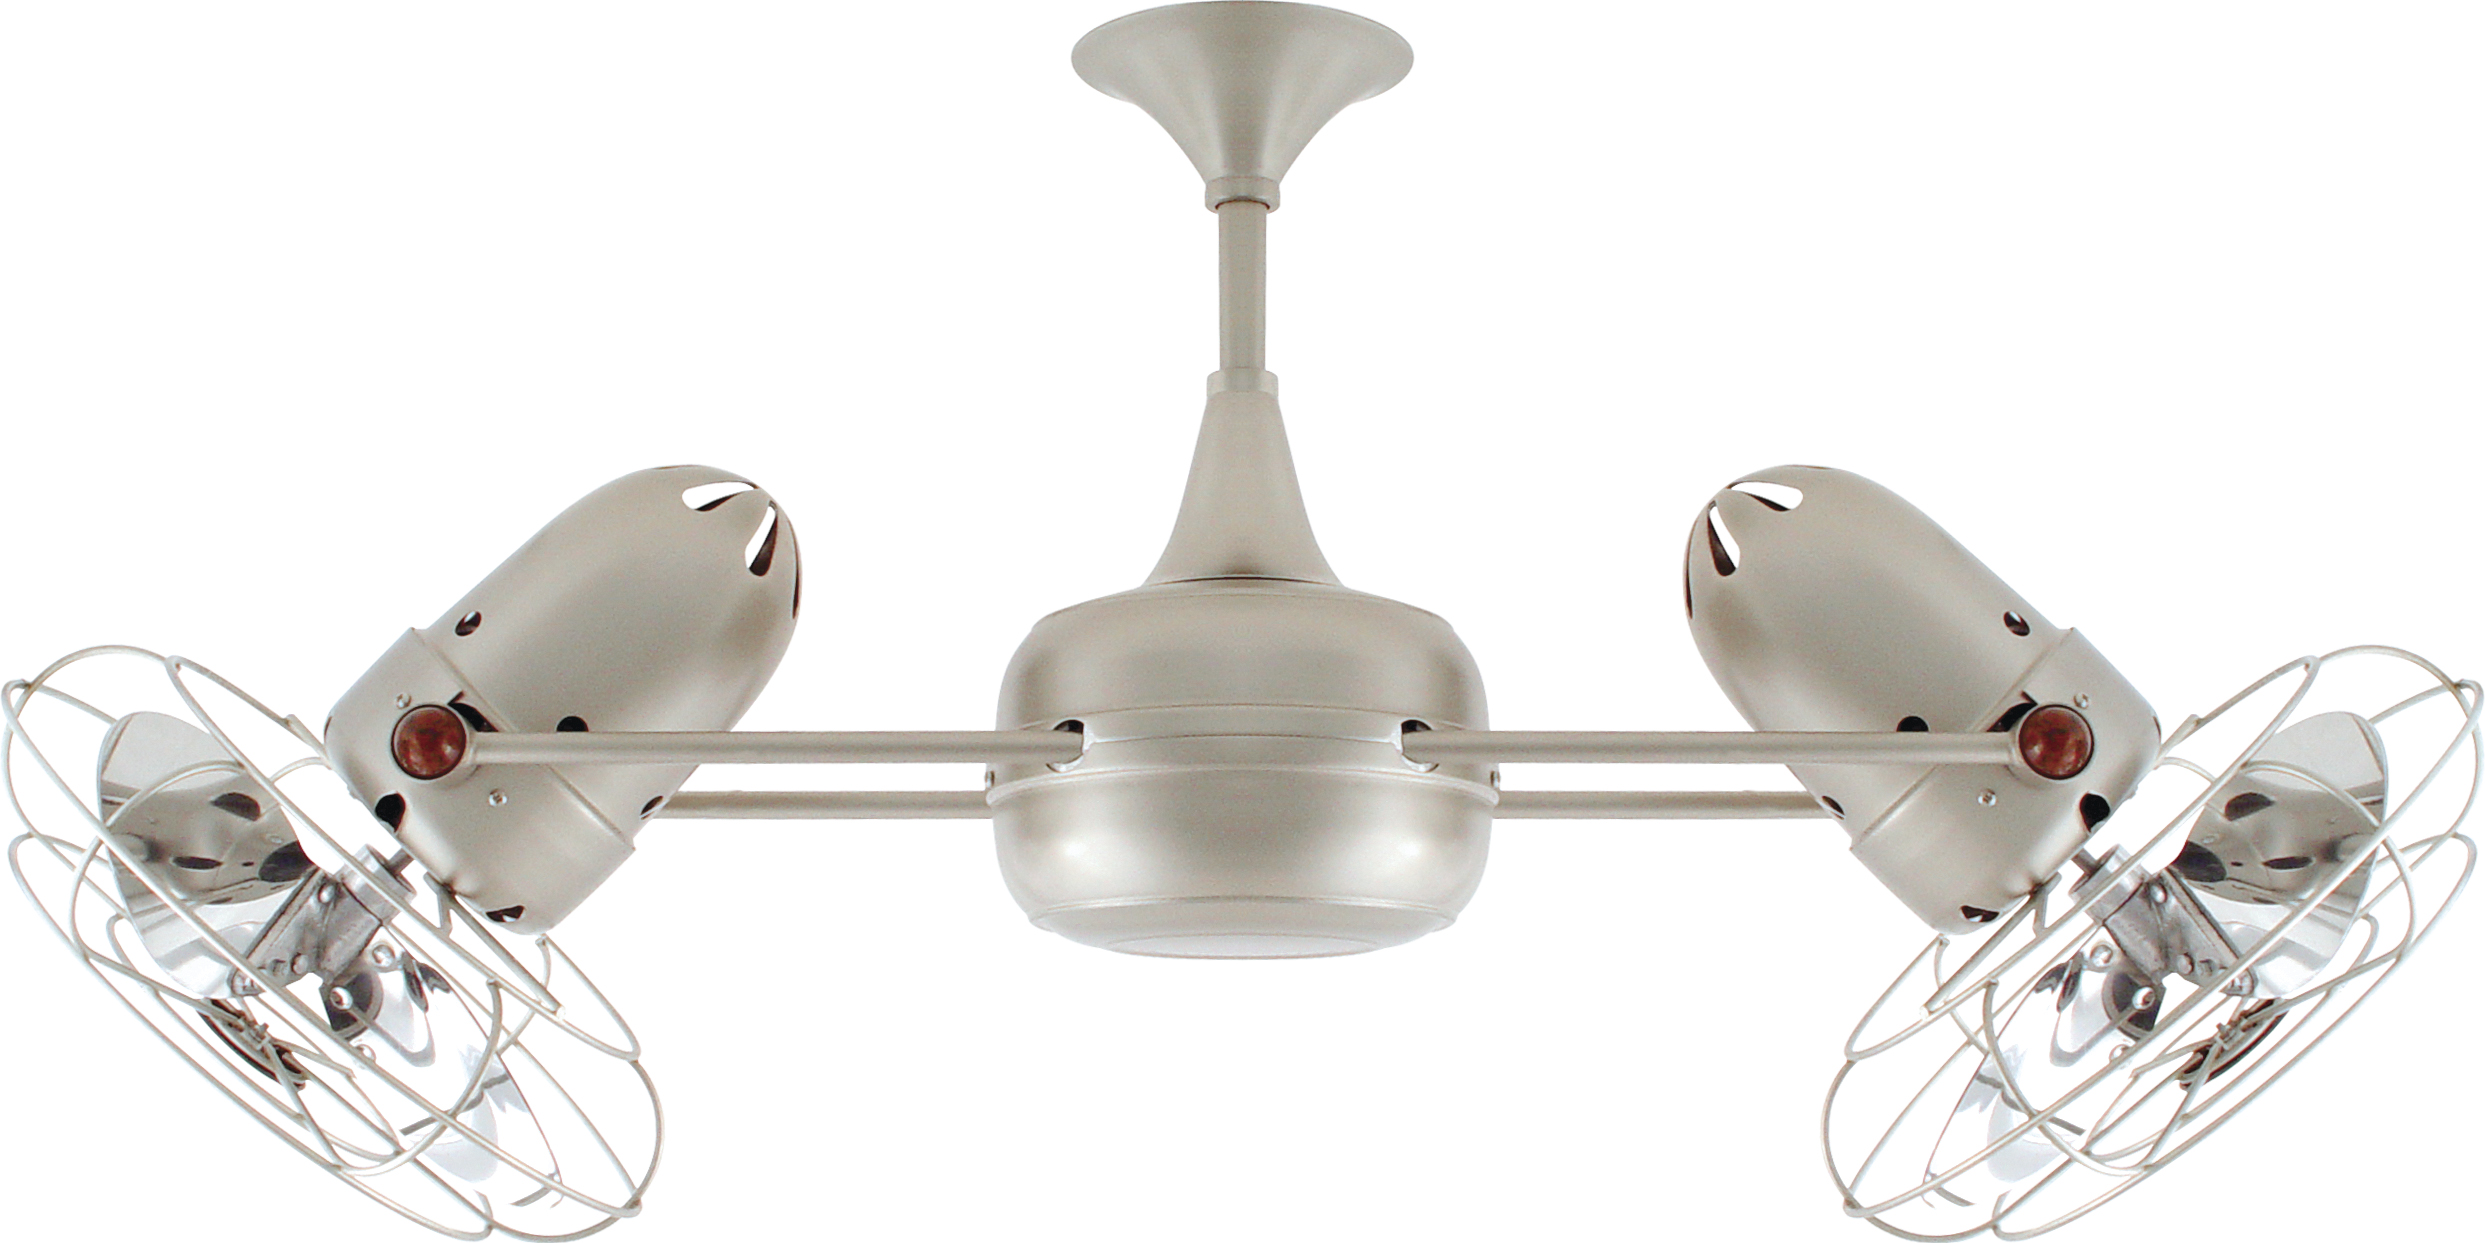 Duplo Dinamico rotational dual head ceiling fan in Brushed Nickel finish with Metal blades made by Matthews Fan Company.